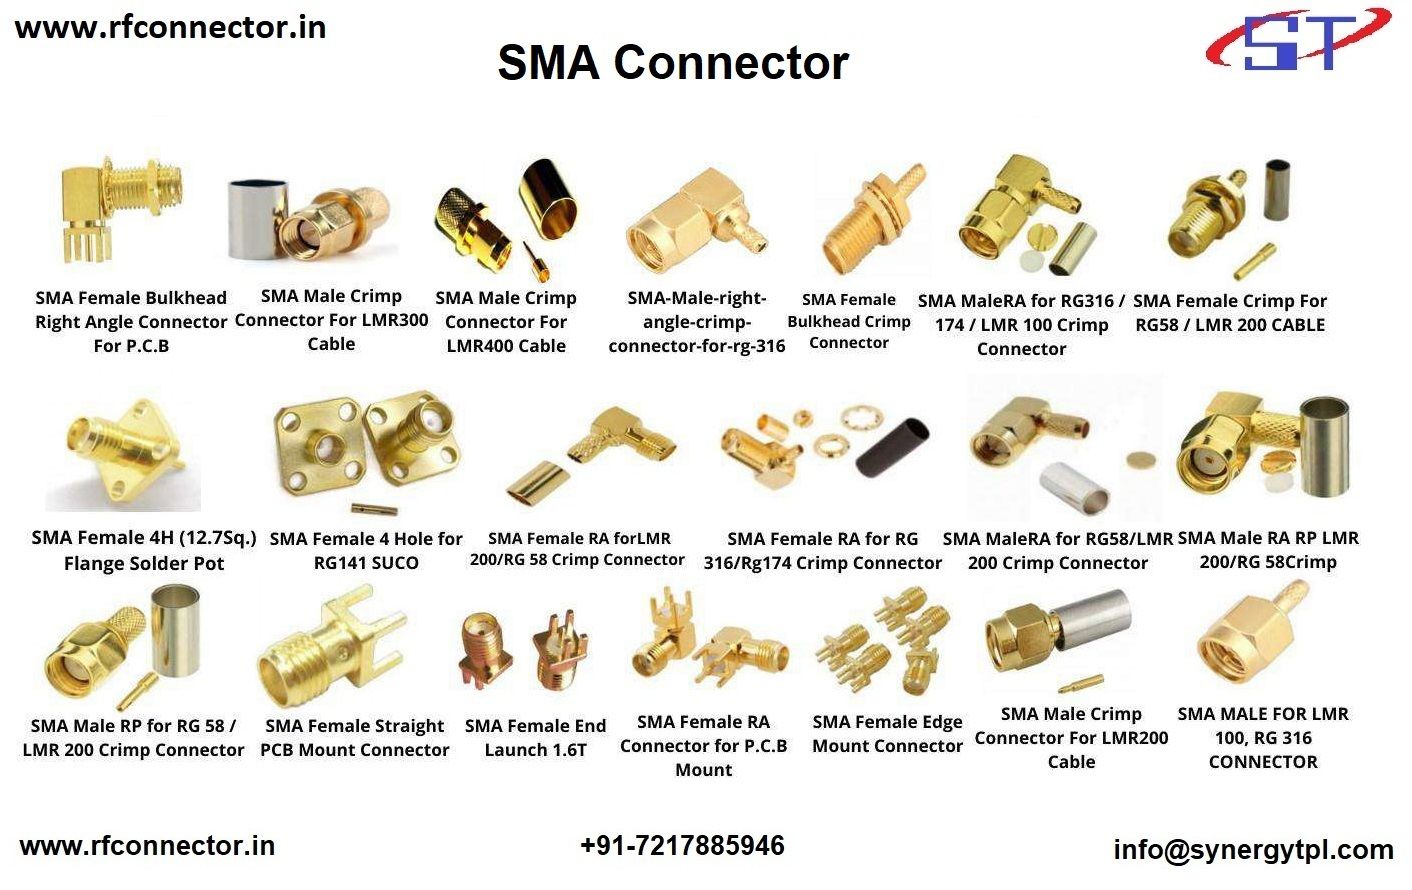 SMA male right angle clamp connector for LMR 300 cable